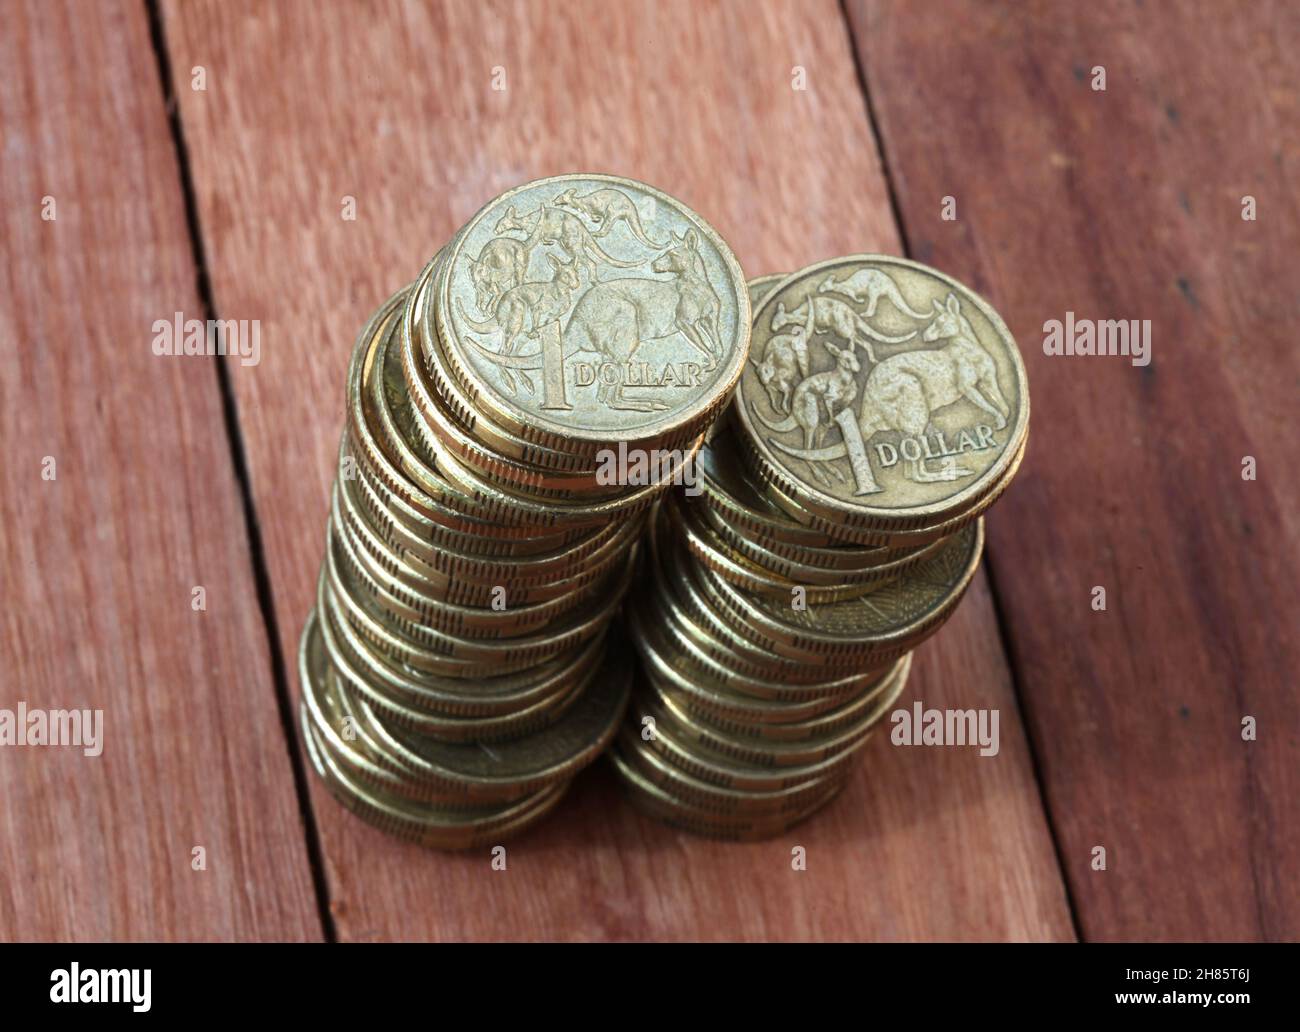 Two piles of Australian one dollar coins on a wooden background. Shallow depth of field focus. Stock Photo